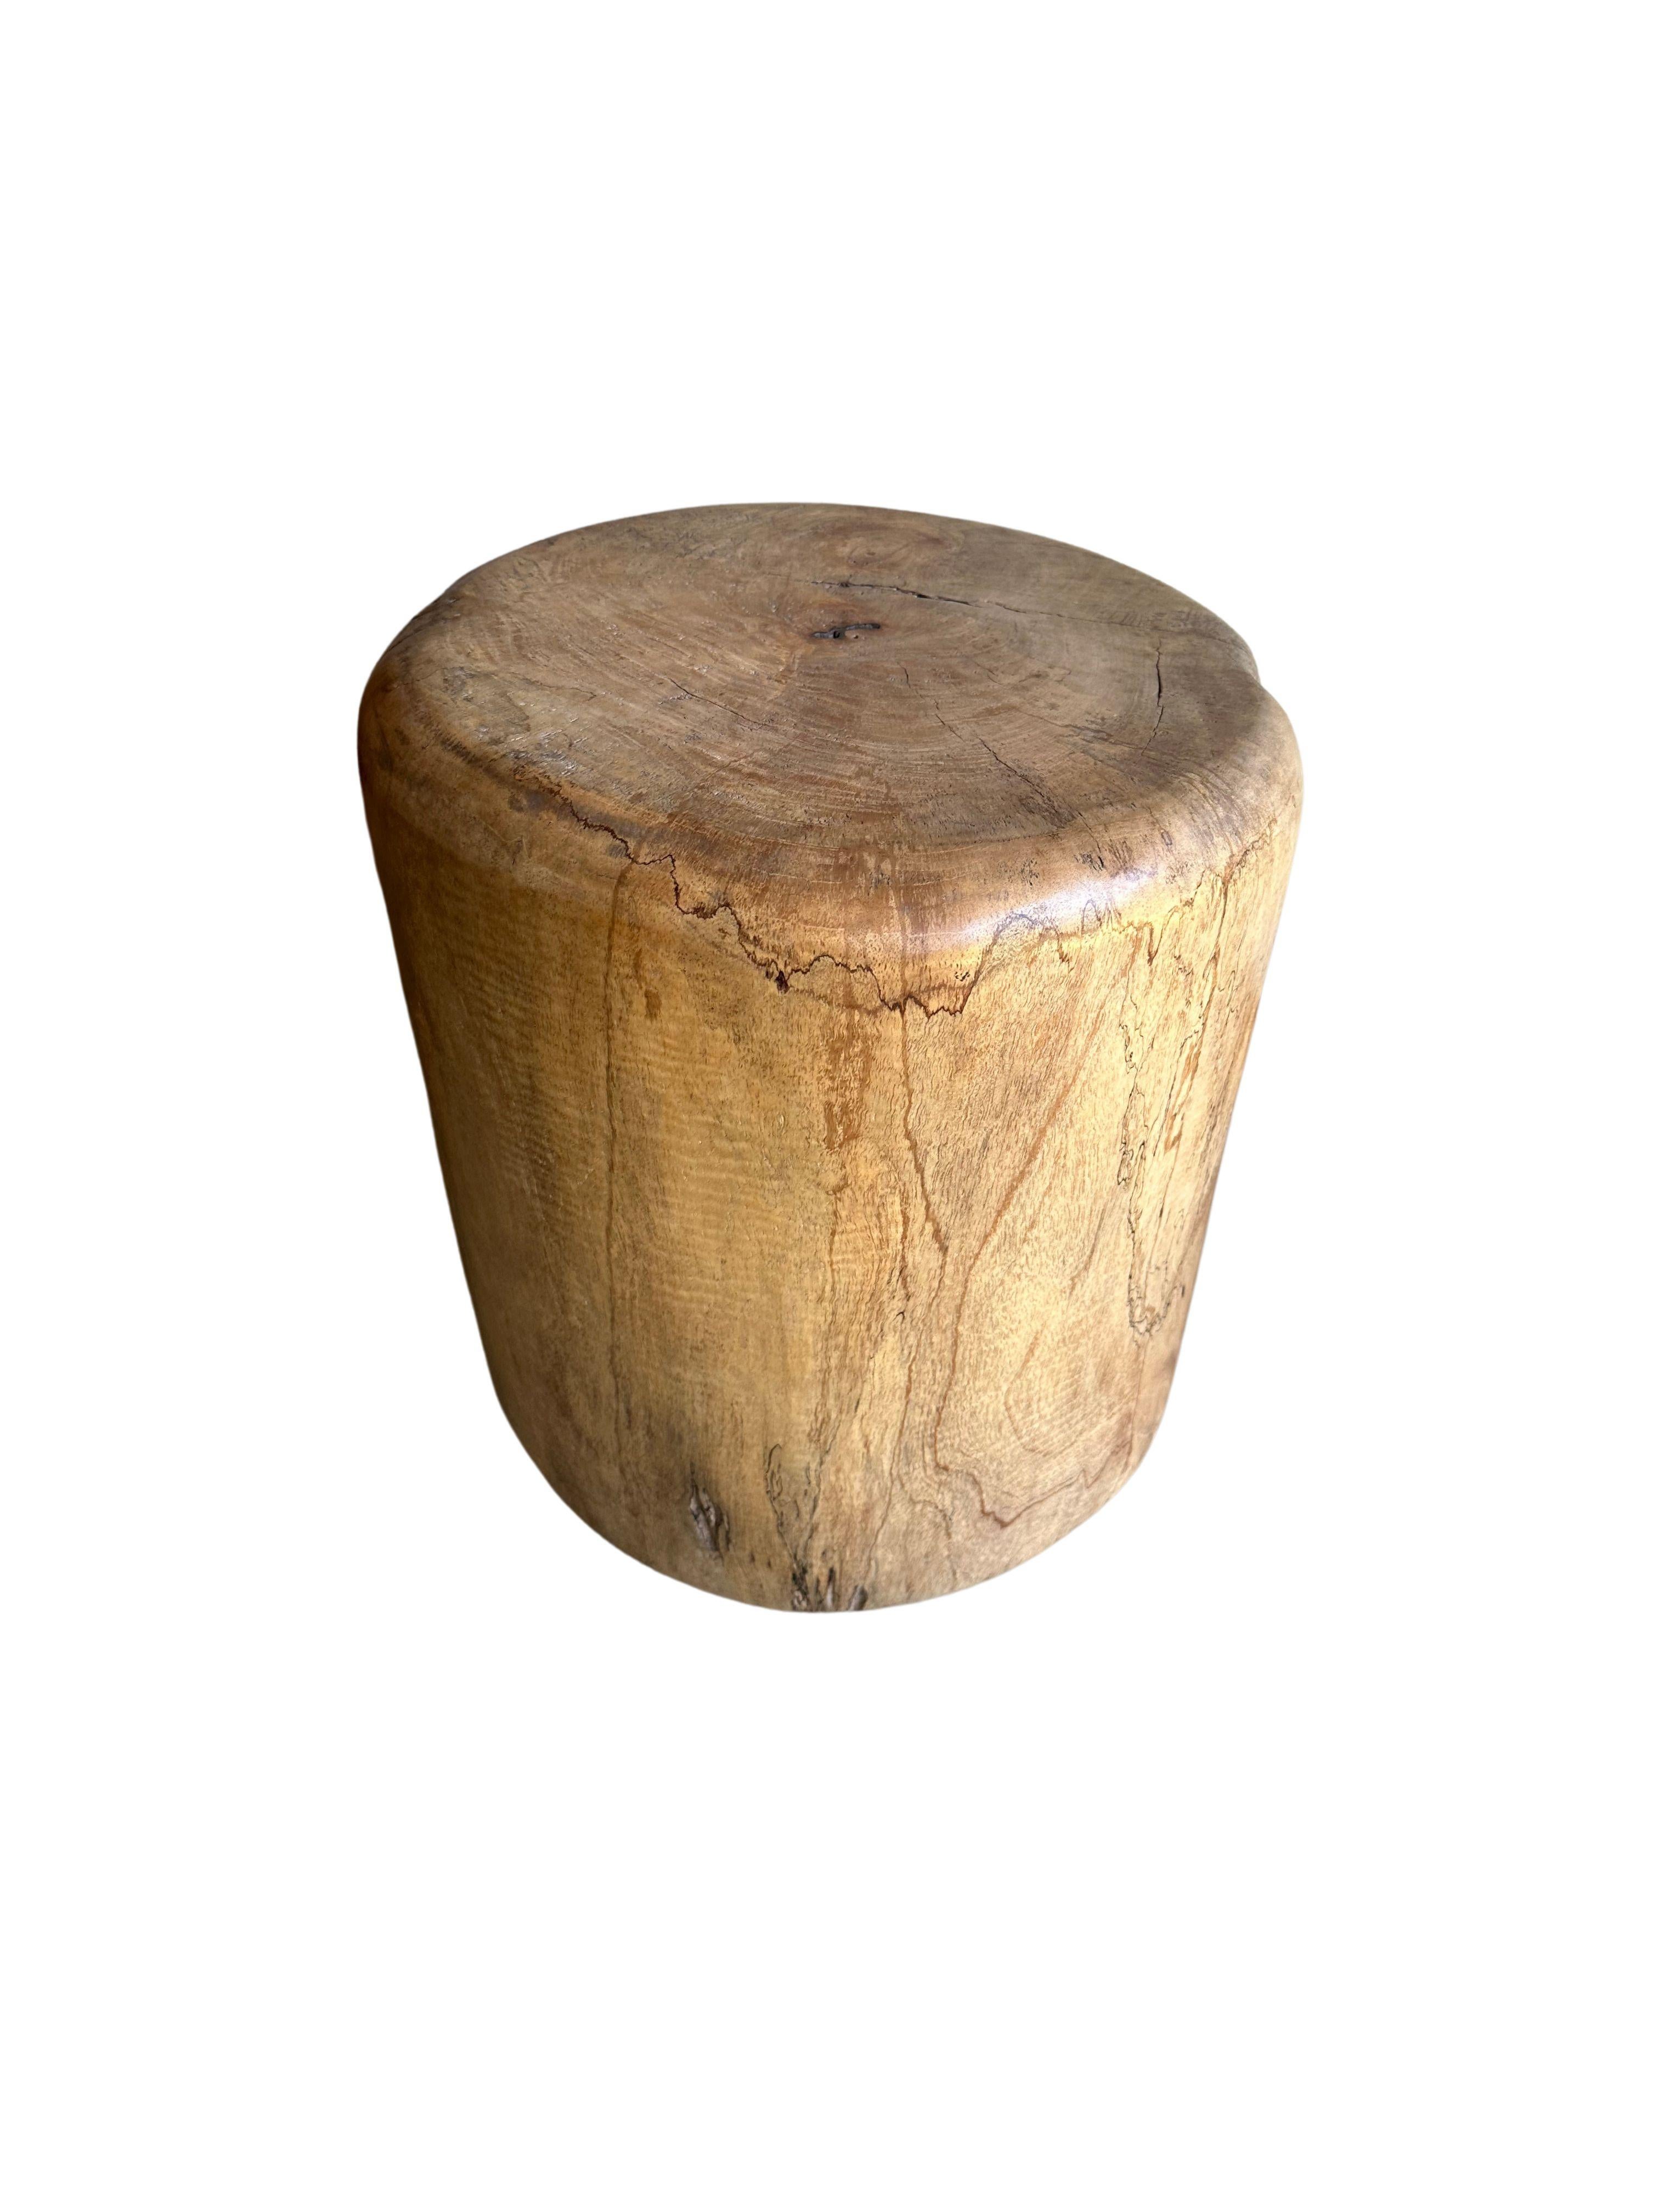 Sculptural Meranti Wood Side Table, with Stunning Wood Textures, Modern Organic In Good Condition For Sale In Jimbaran, Bali